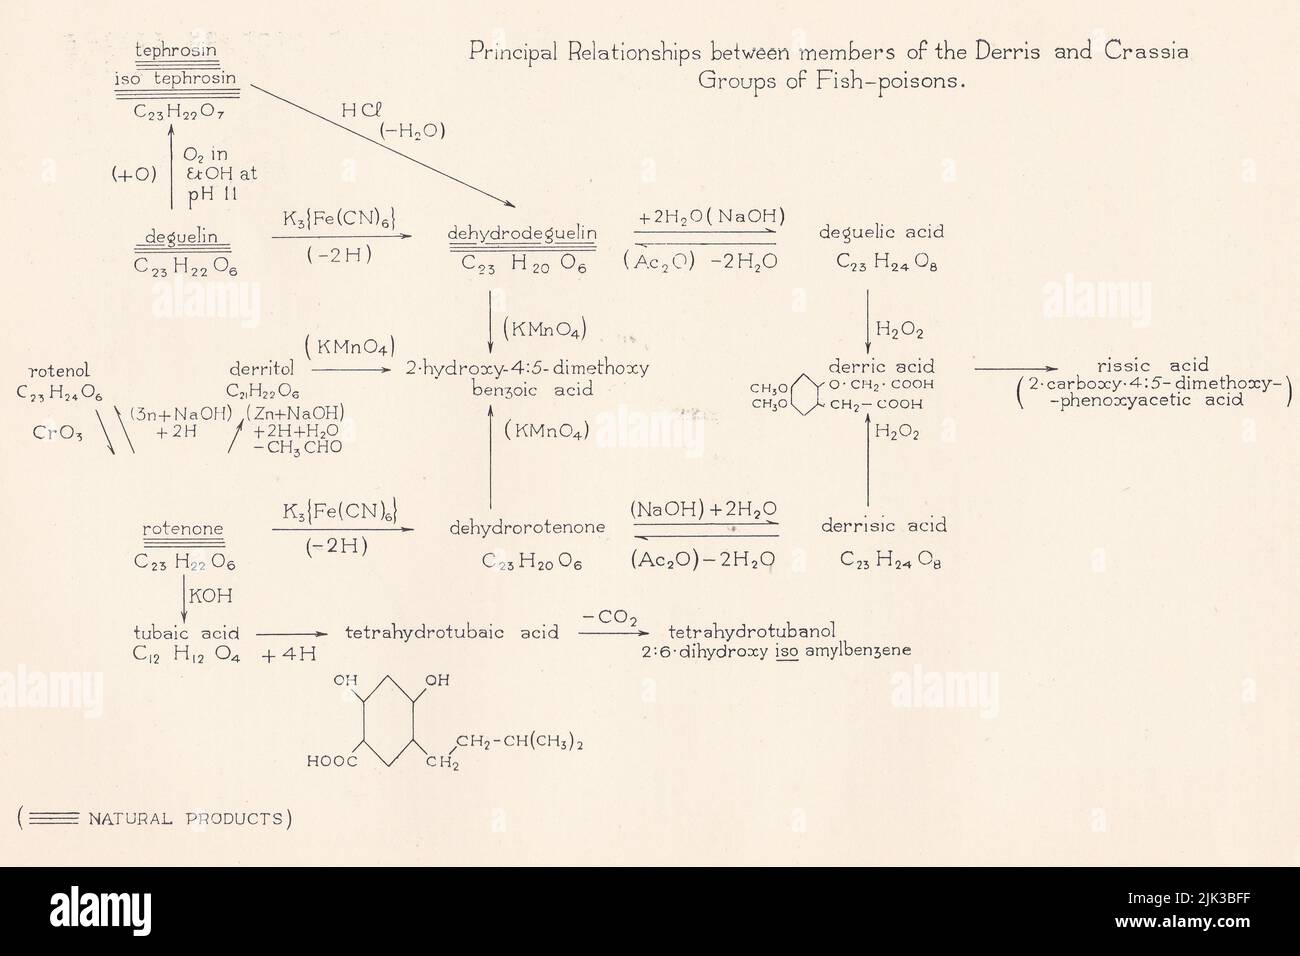 Vintage chart showing the principal relationships between members of the Derris and Crassia group of fish-poisons. Stock Photo